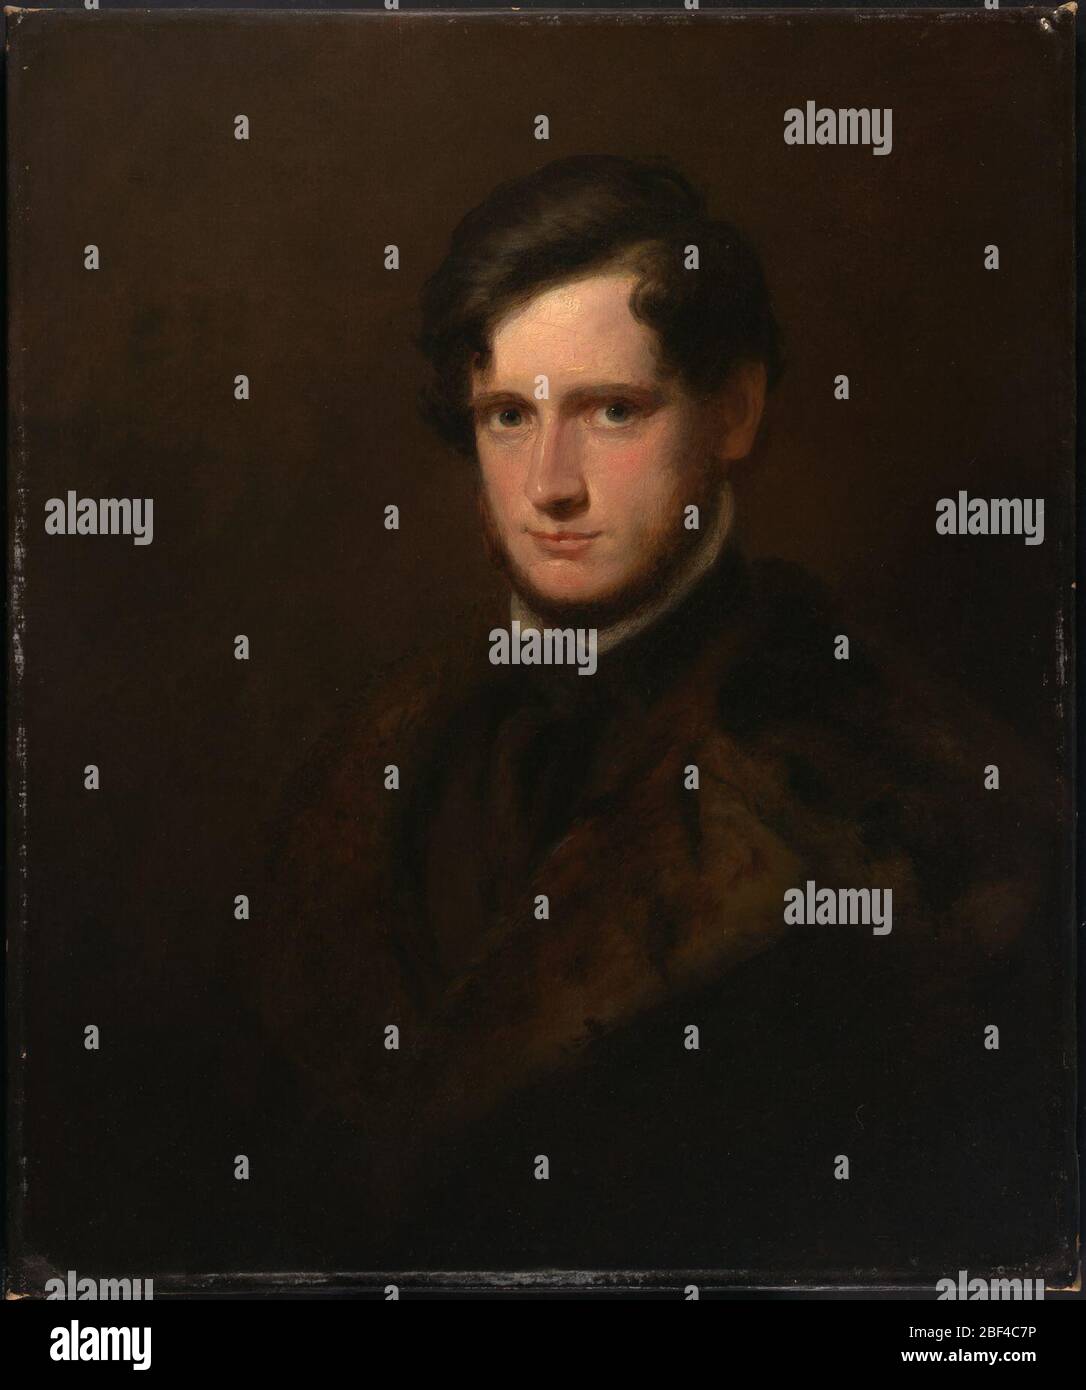 John Lothrop Motley. John Lothrop Motley; his daughter Mary Motley Sheridan; her son Wilfred Sheridan; Richard Sheridan [d. 1921]; his mother Clare Sheridan, Belmont House, Old Hastings,Sussex; (M. Knoedler & Co., New York); purchased by NPG 1966. Stock Photo